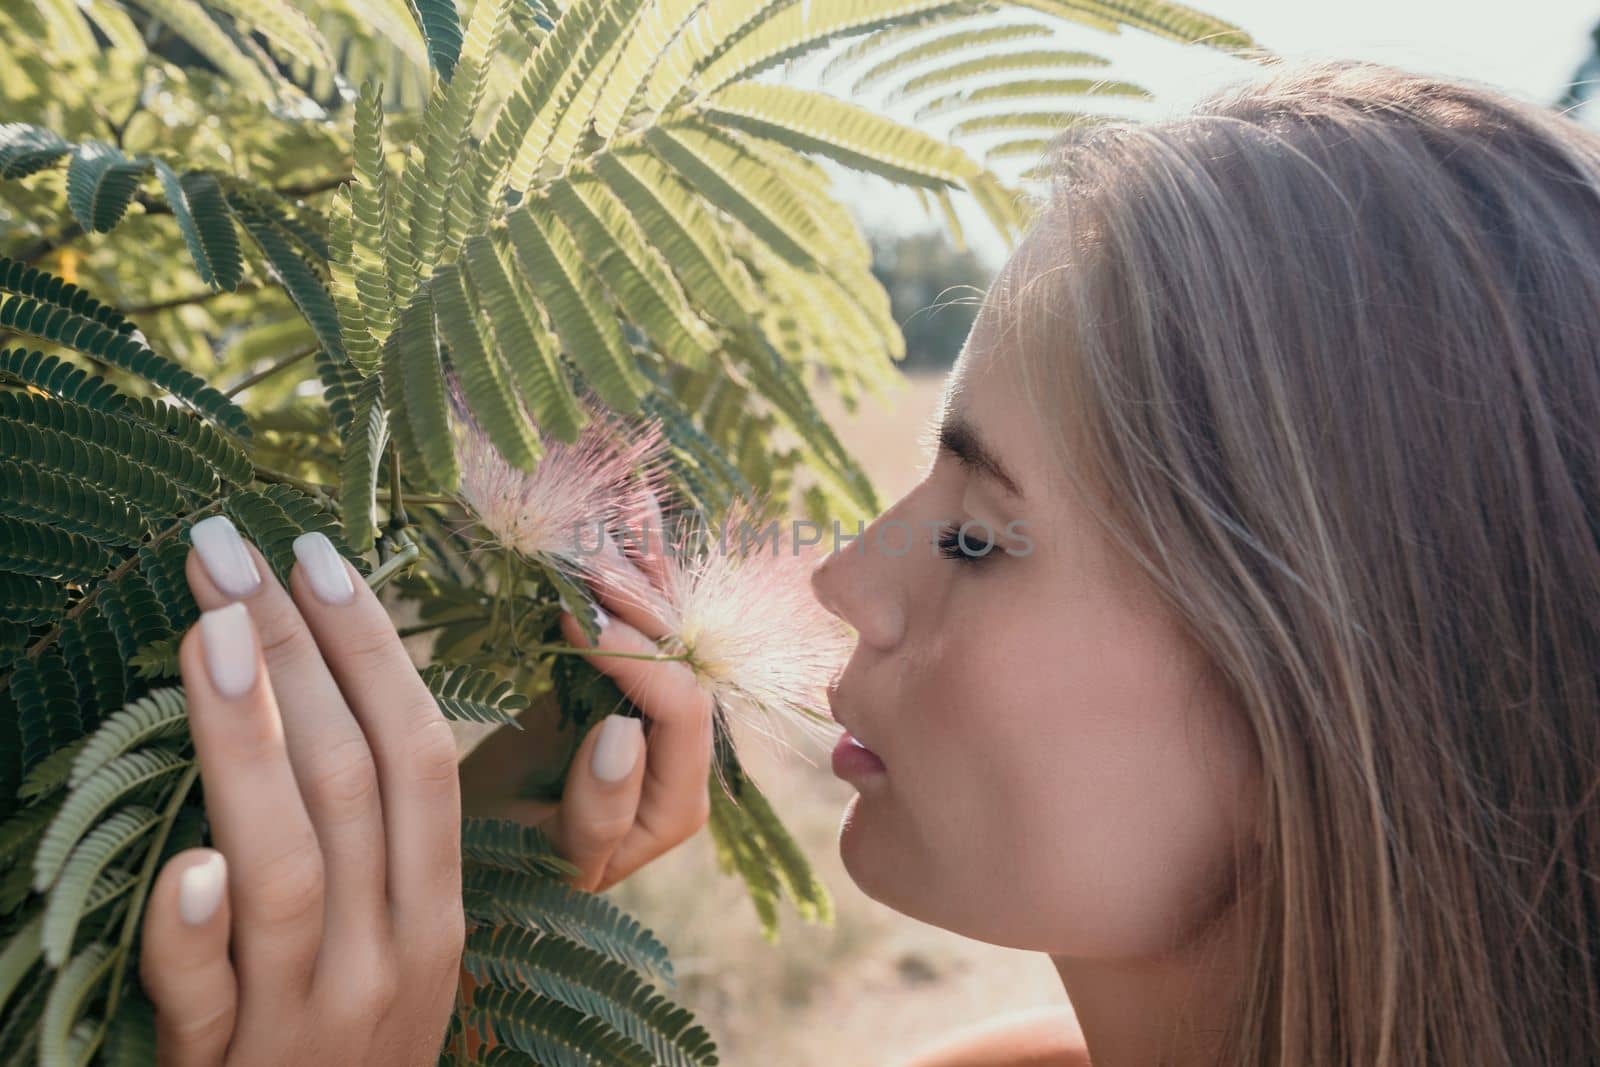 Beauty portrait of young woman closeup. Young girl smelling Chinese acacia pink blossoming flowers. Portrait of young woman in blooming spring, summer garden. Romantic vibe. Female and nature.